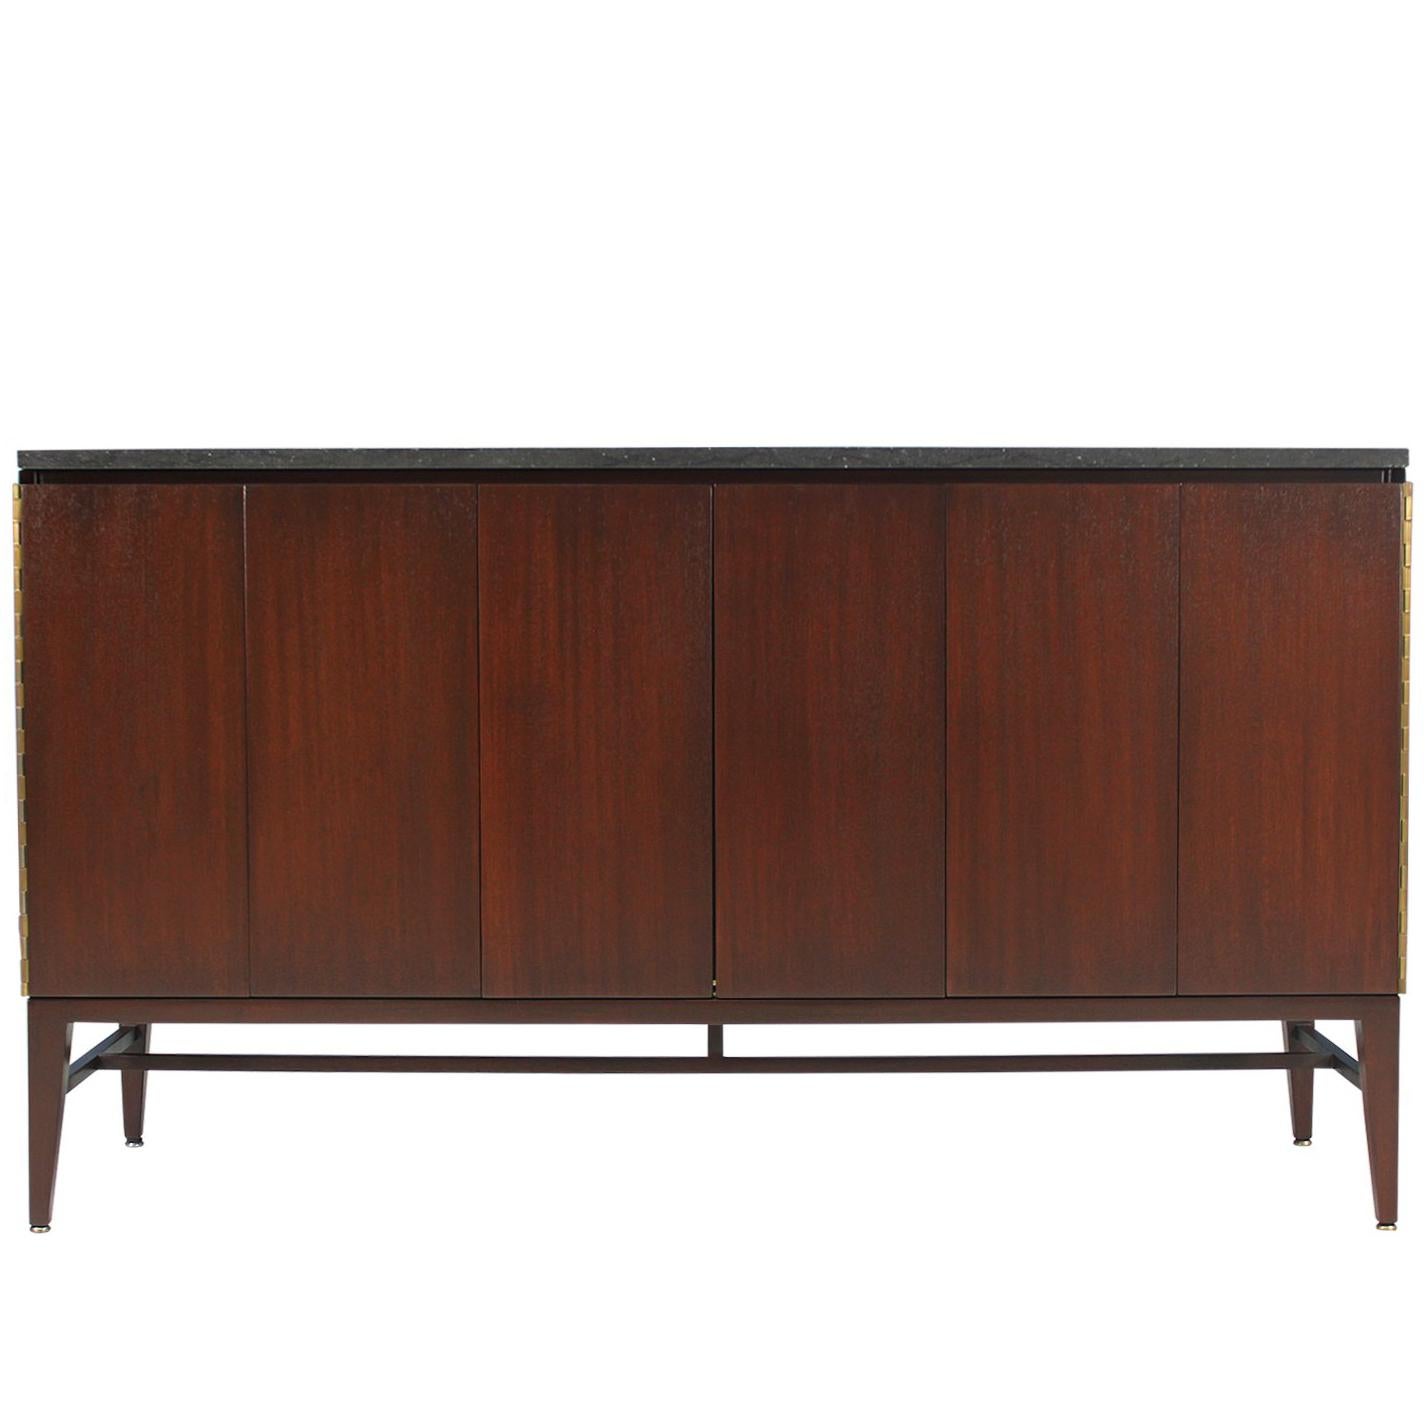 Paul McCobb “Irwin Collection” Credenza with Bi-Folding Doors & Black Marble Top